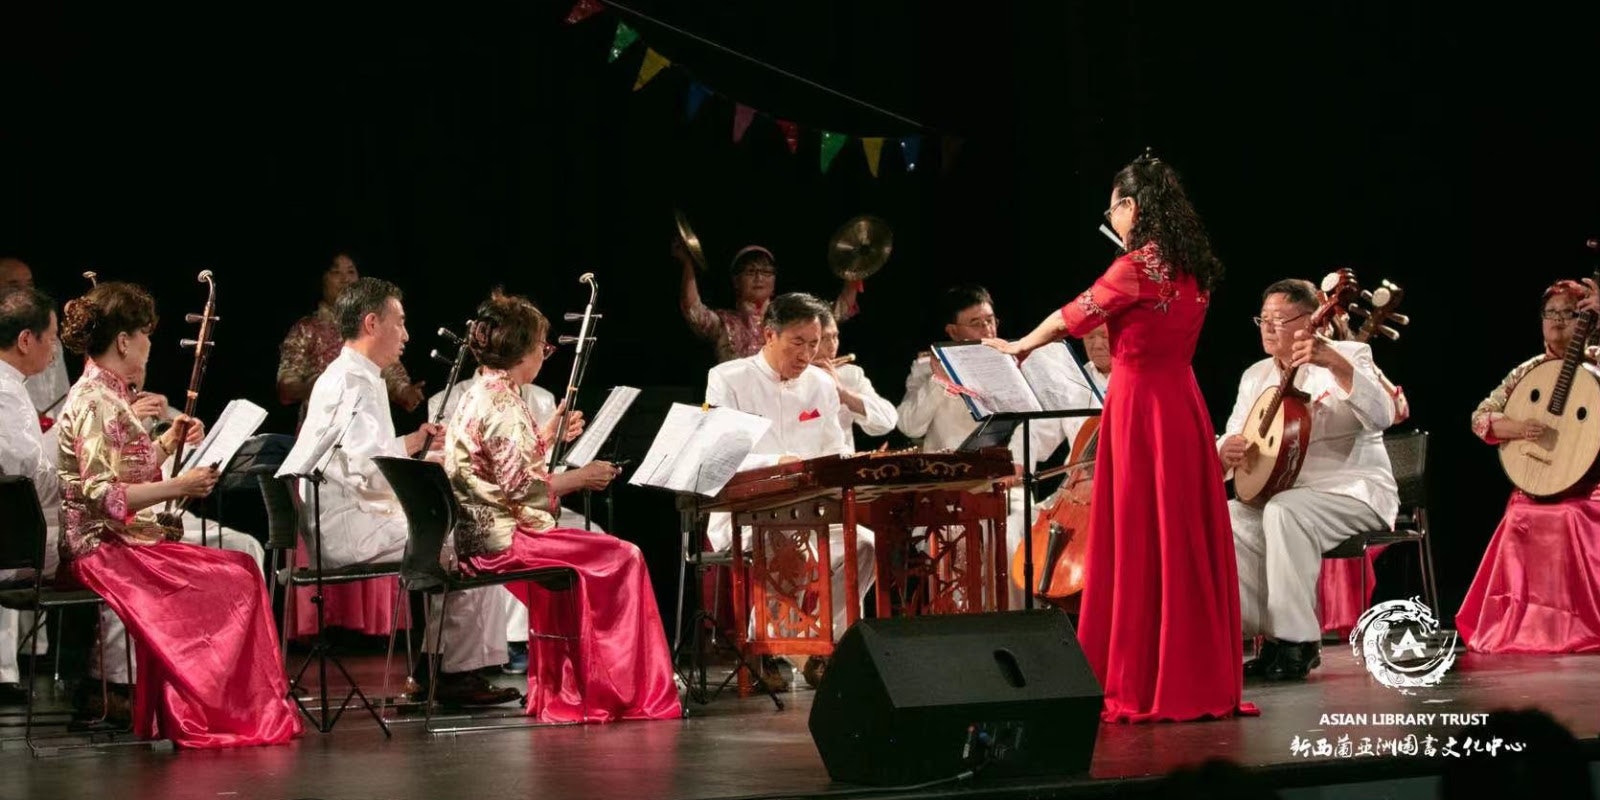 The Chinese Blossom String Music Group